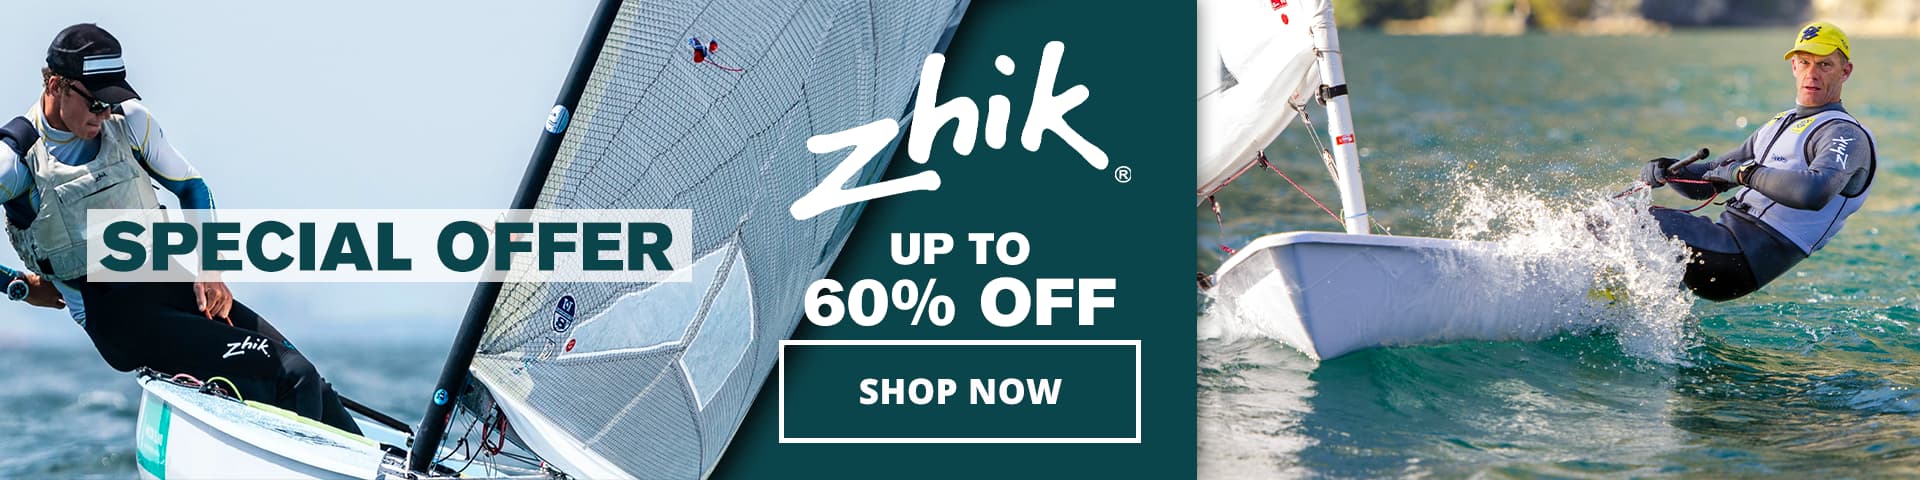 Zhik Superwarm Close Out up to 60% off